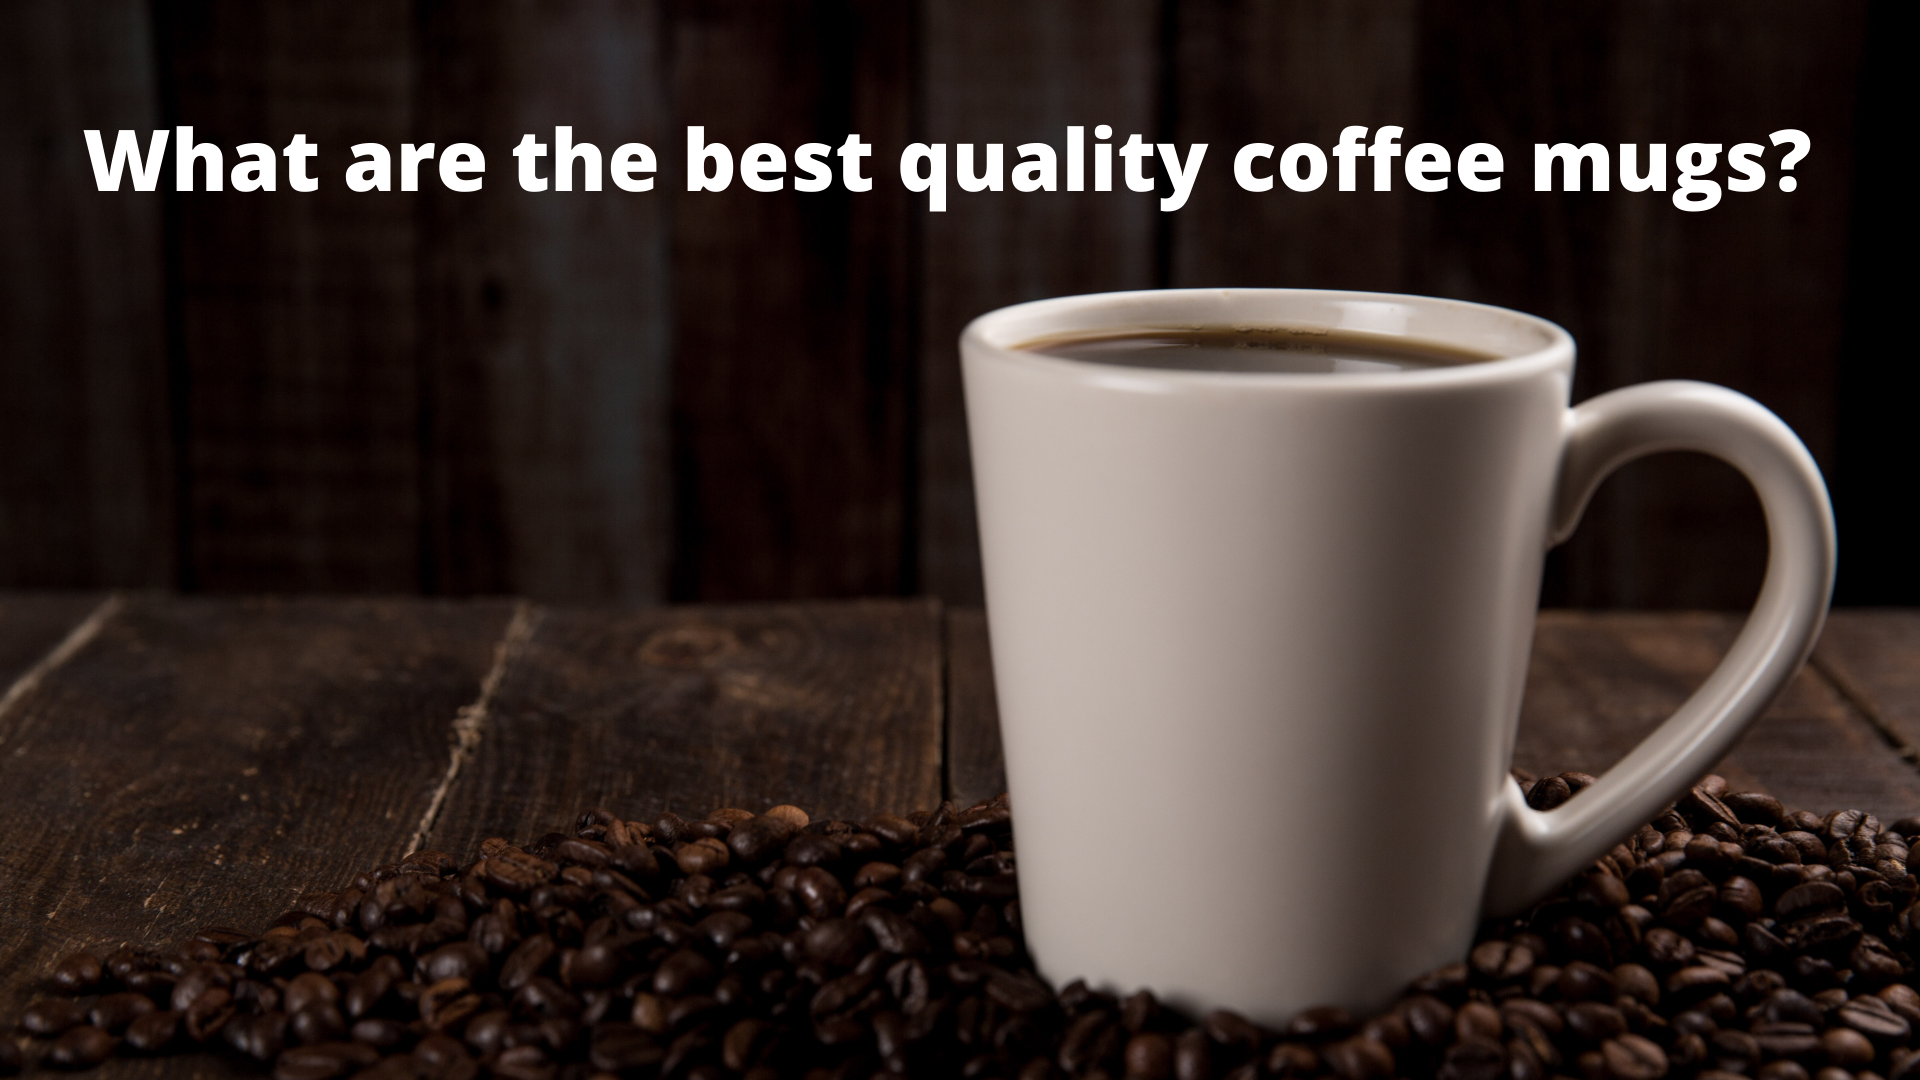 What are the best quality coffee mugs?